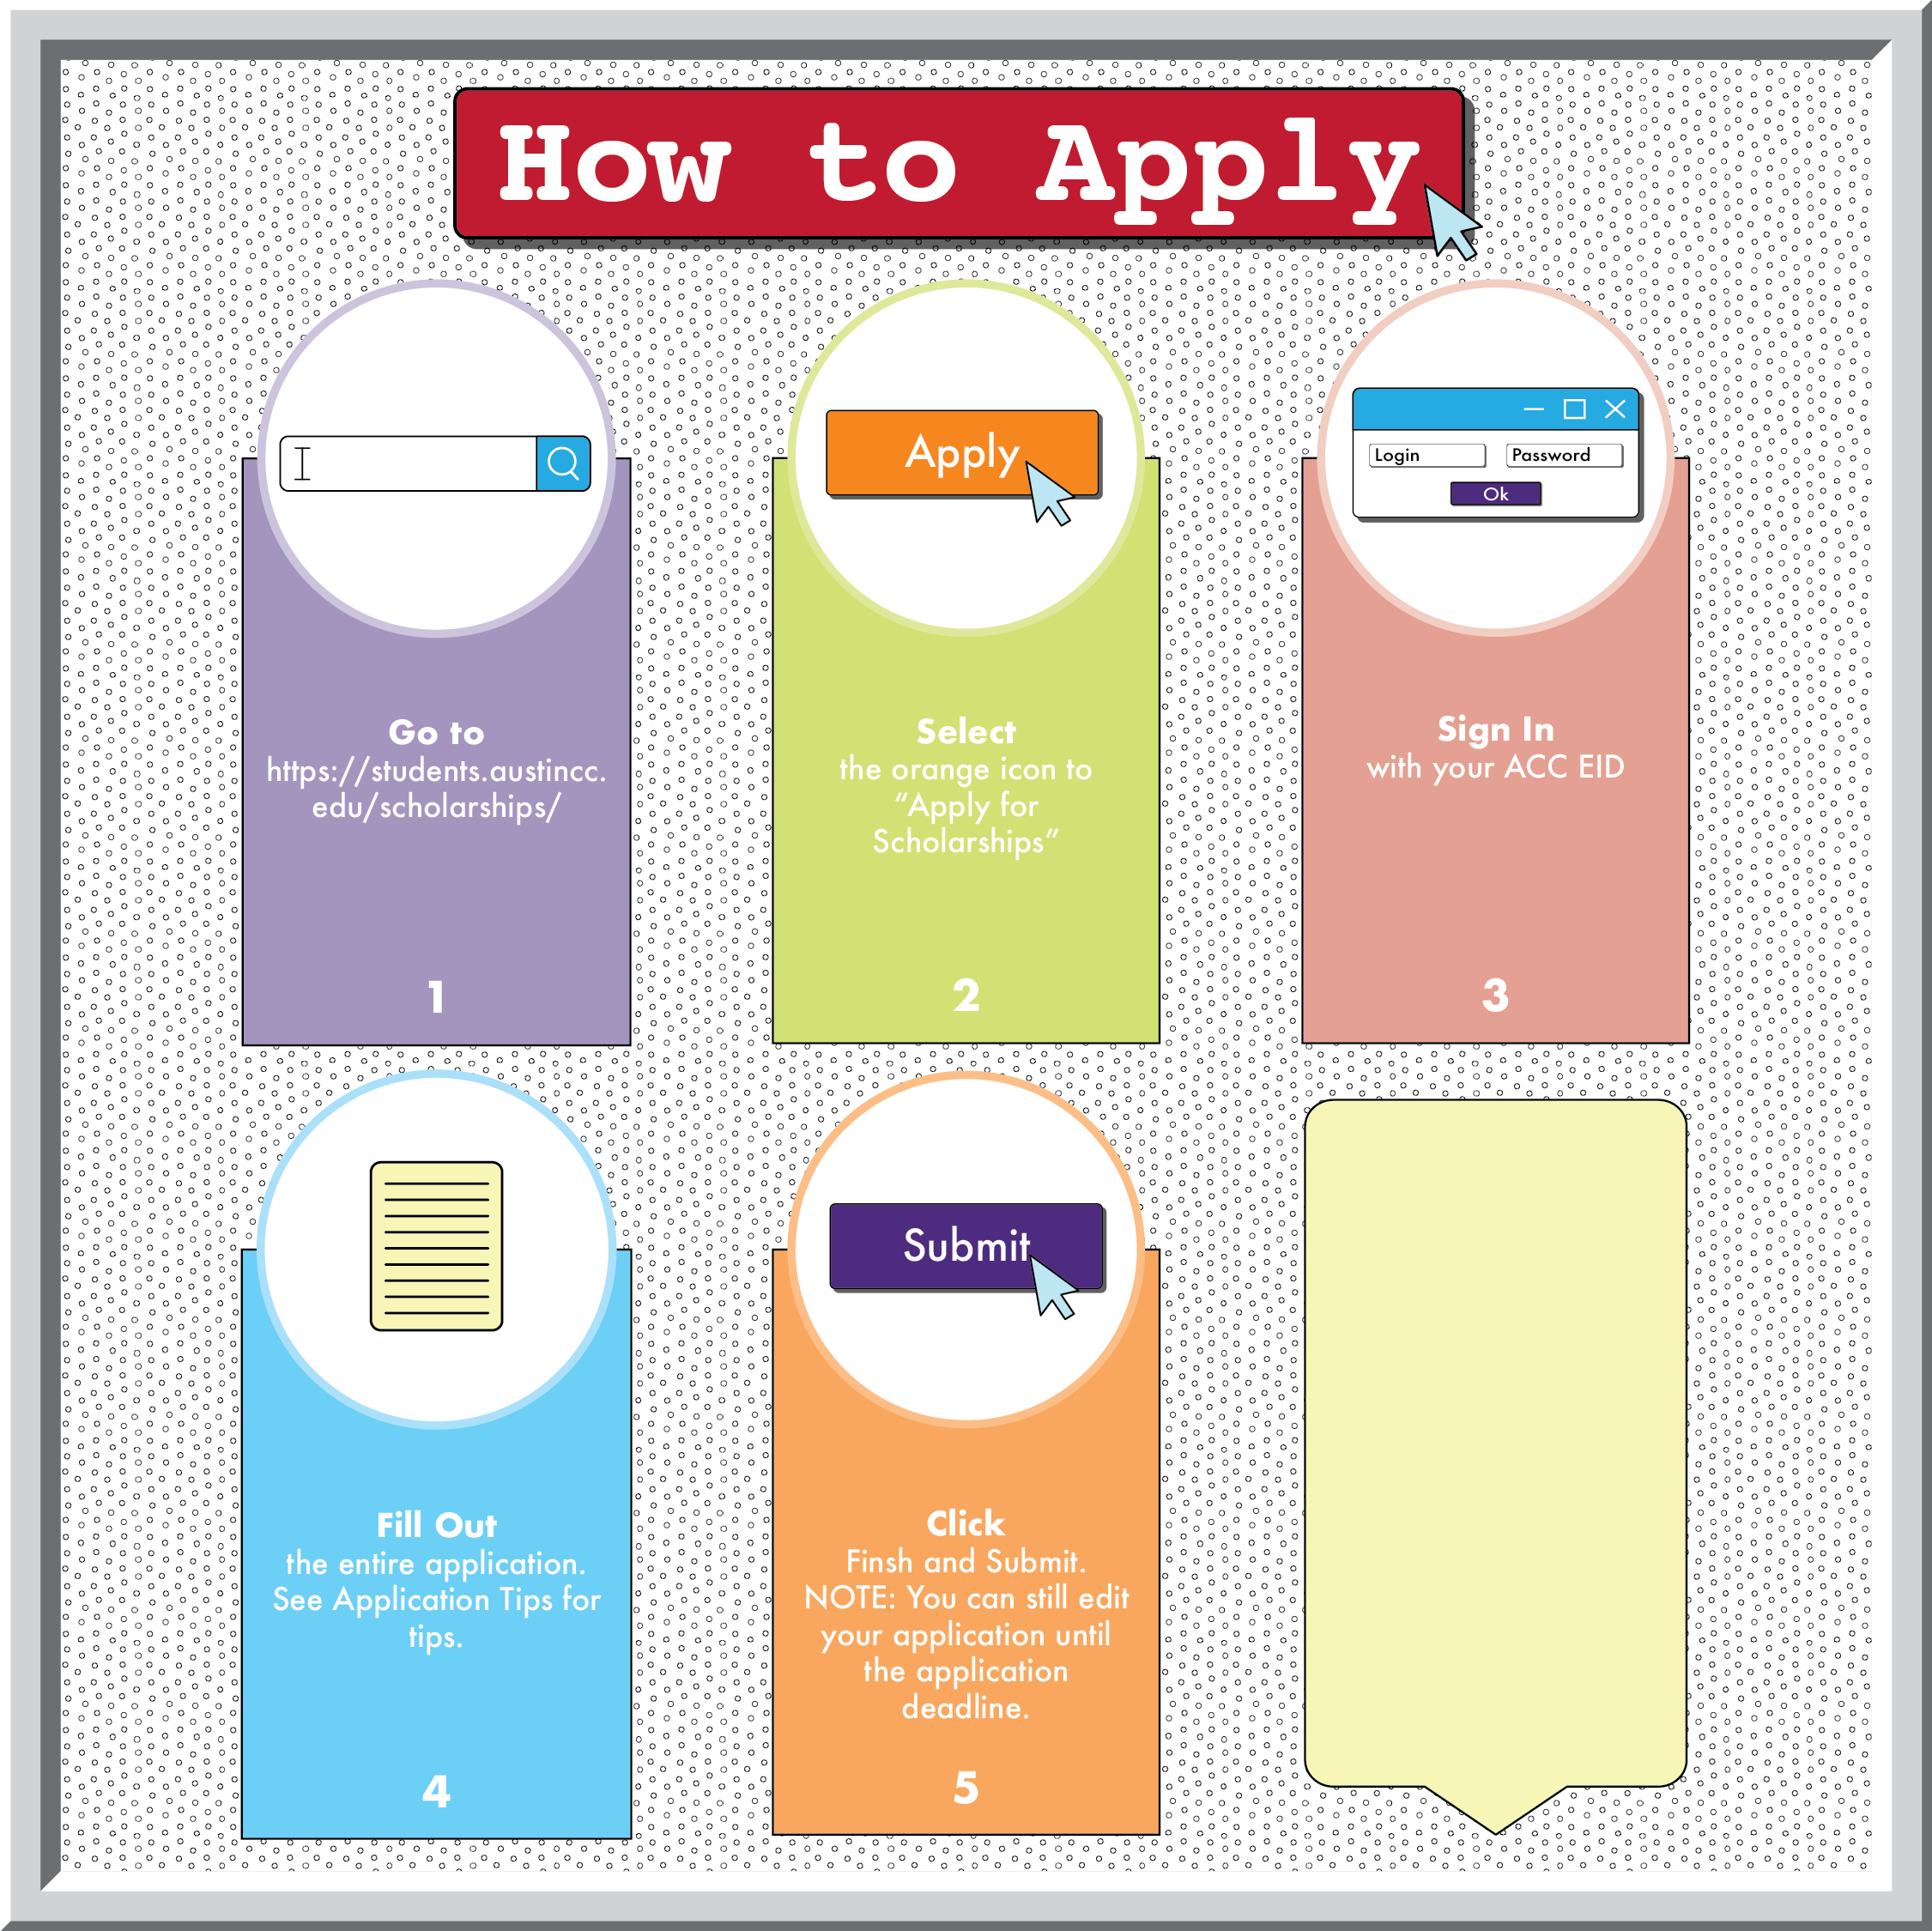 How to apply

Step 1: Go to students.austincc.edu/scholarships

Step 2 - Click the 'Apply for Scholarships' button

Step 3 - Sign in with your ACC EID

Step 4 - Fill out the entire application

Step 5- Click Submit.

Note - You can still edit your application until the application deadline